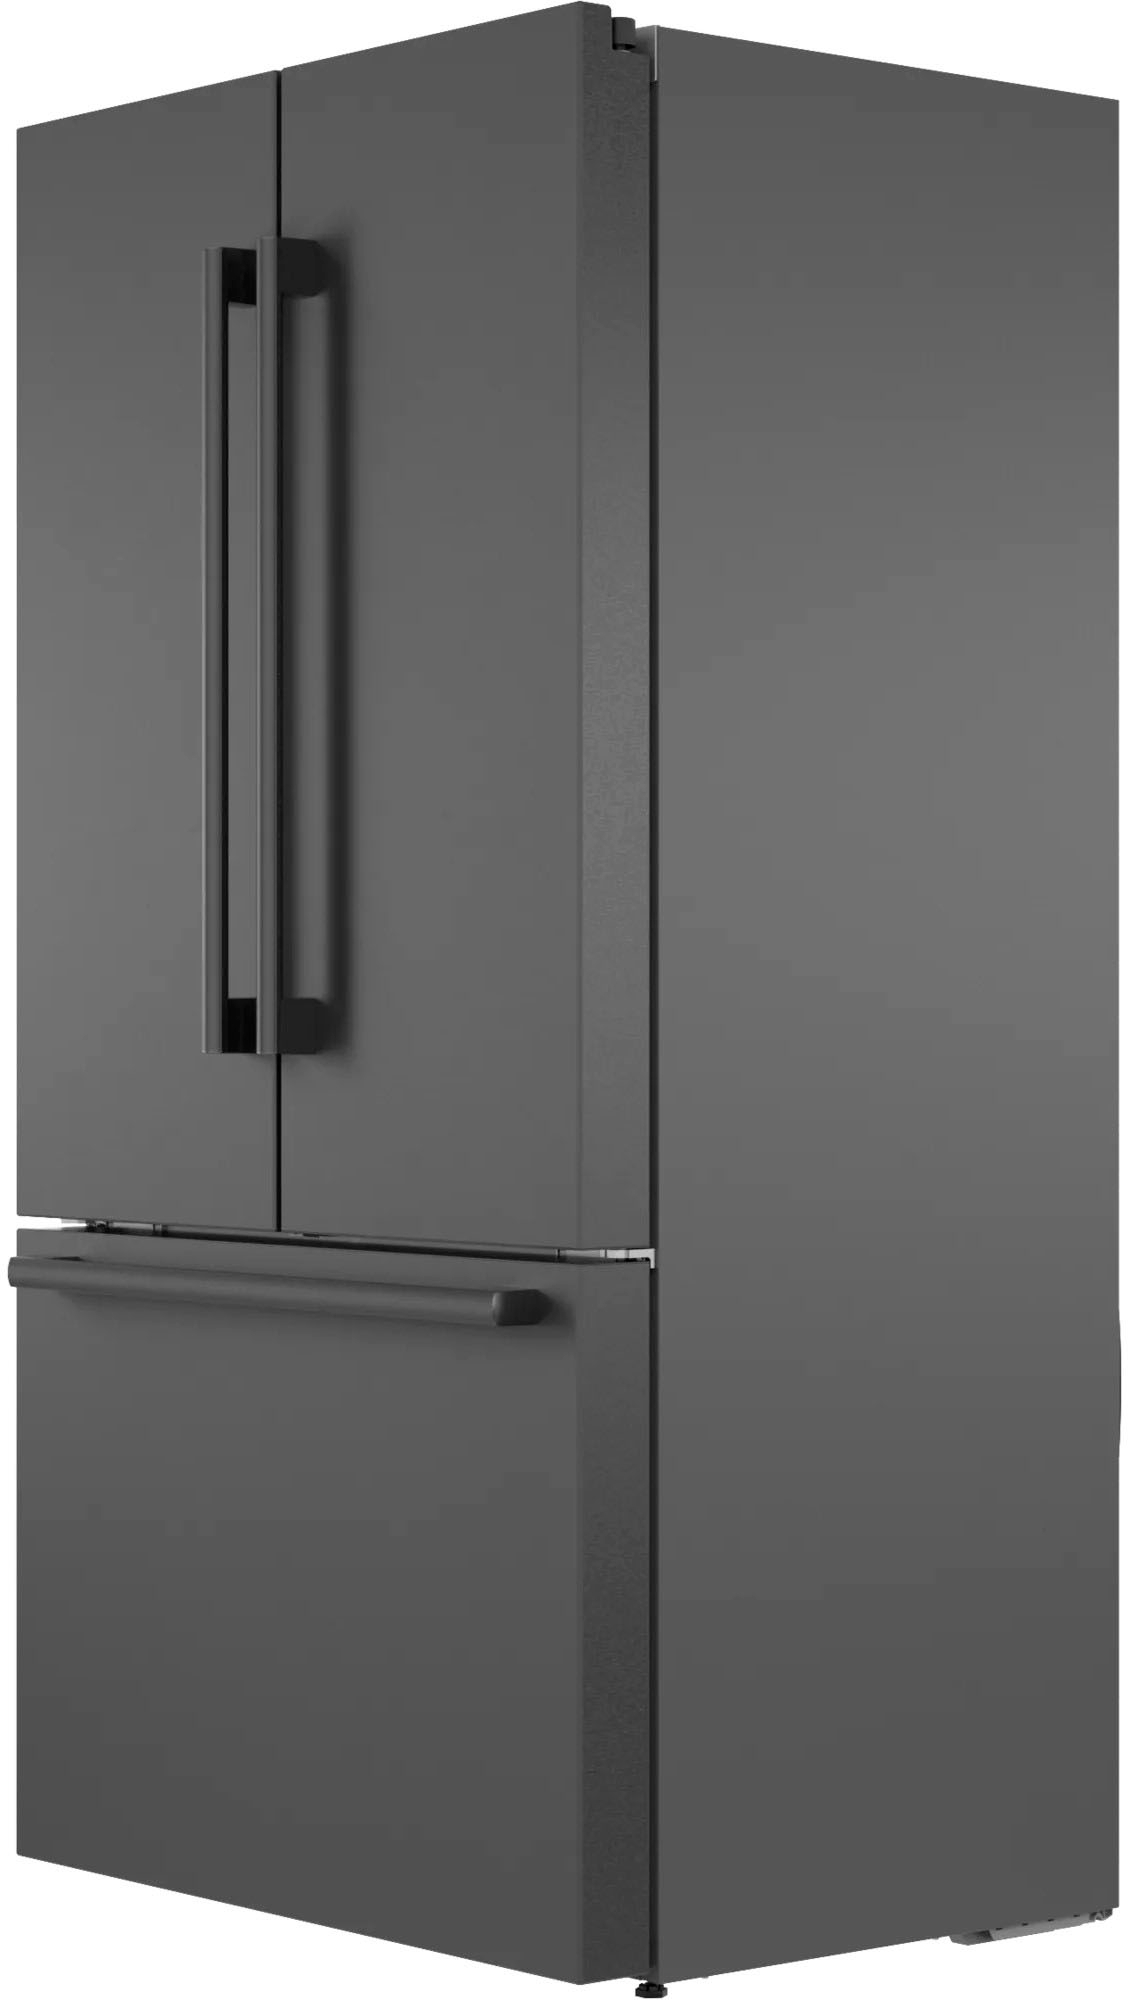 Bosch 800 Series Cu. Ft. French Counter-Depth Refrigerator Black stainless steel B36CT80SNB - Best Buy